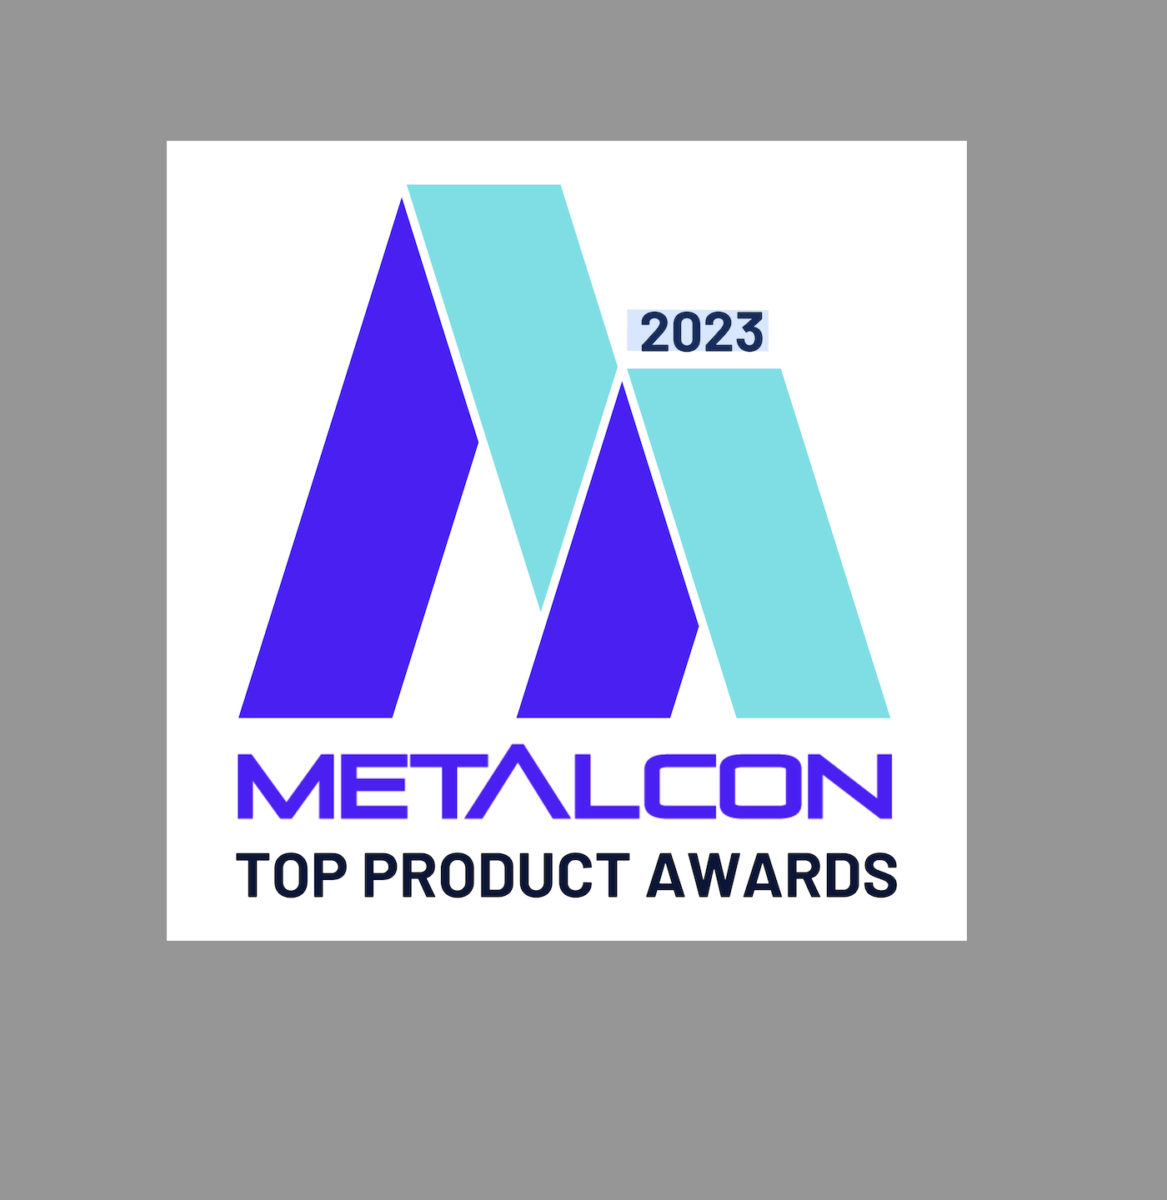 METALCON Launches 2023 Top Product Awards Roofing